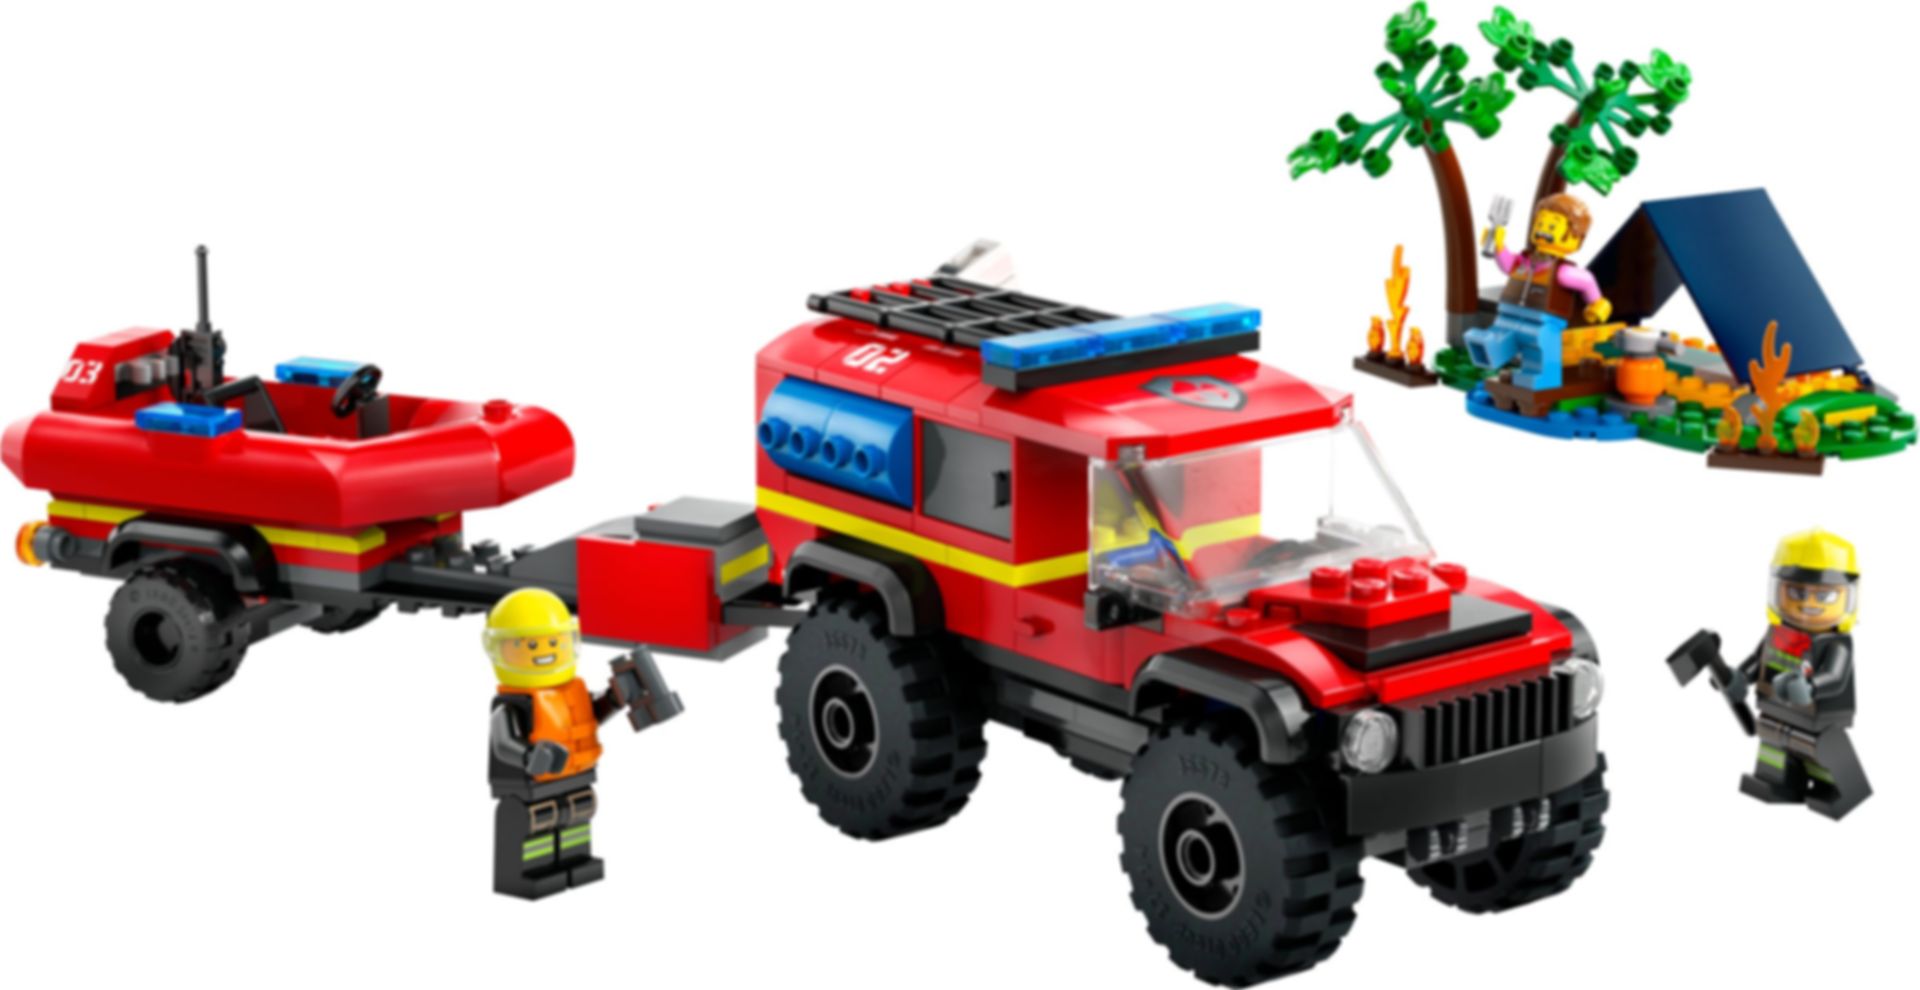 LEGO® City 4x4 Fire Truck with Rescue Boat components